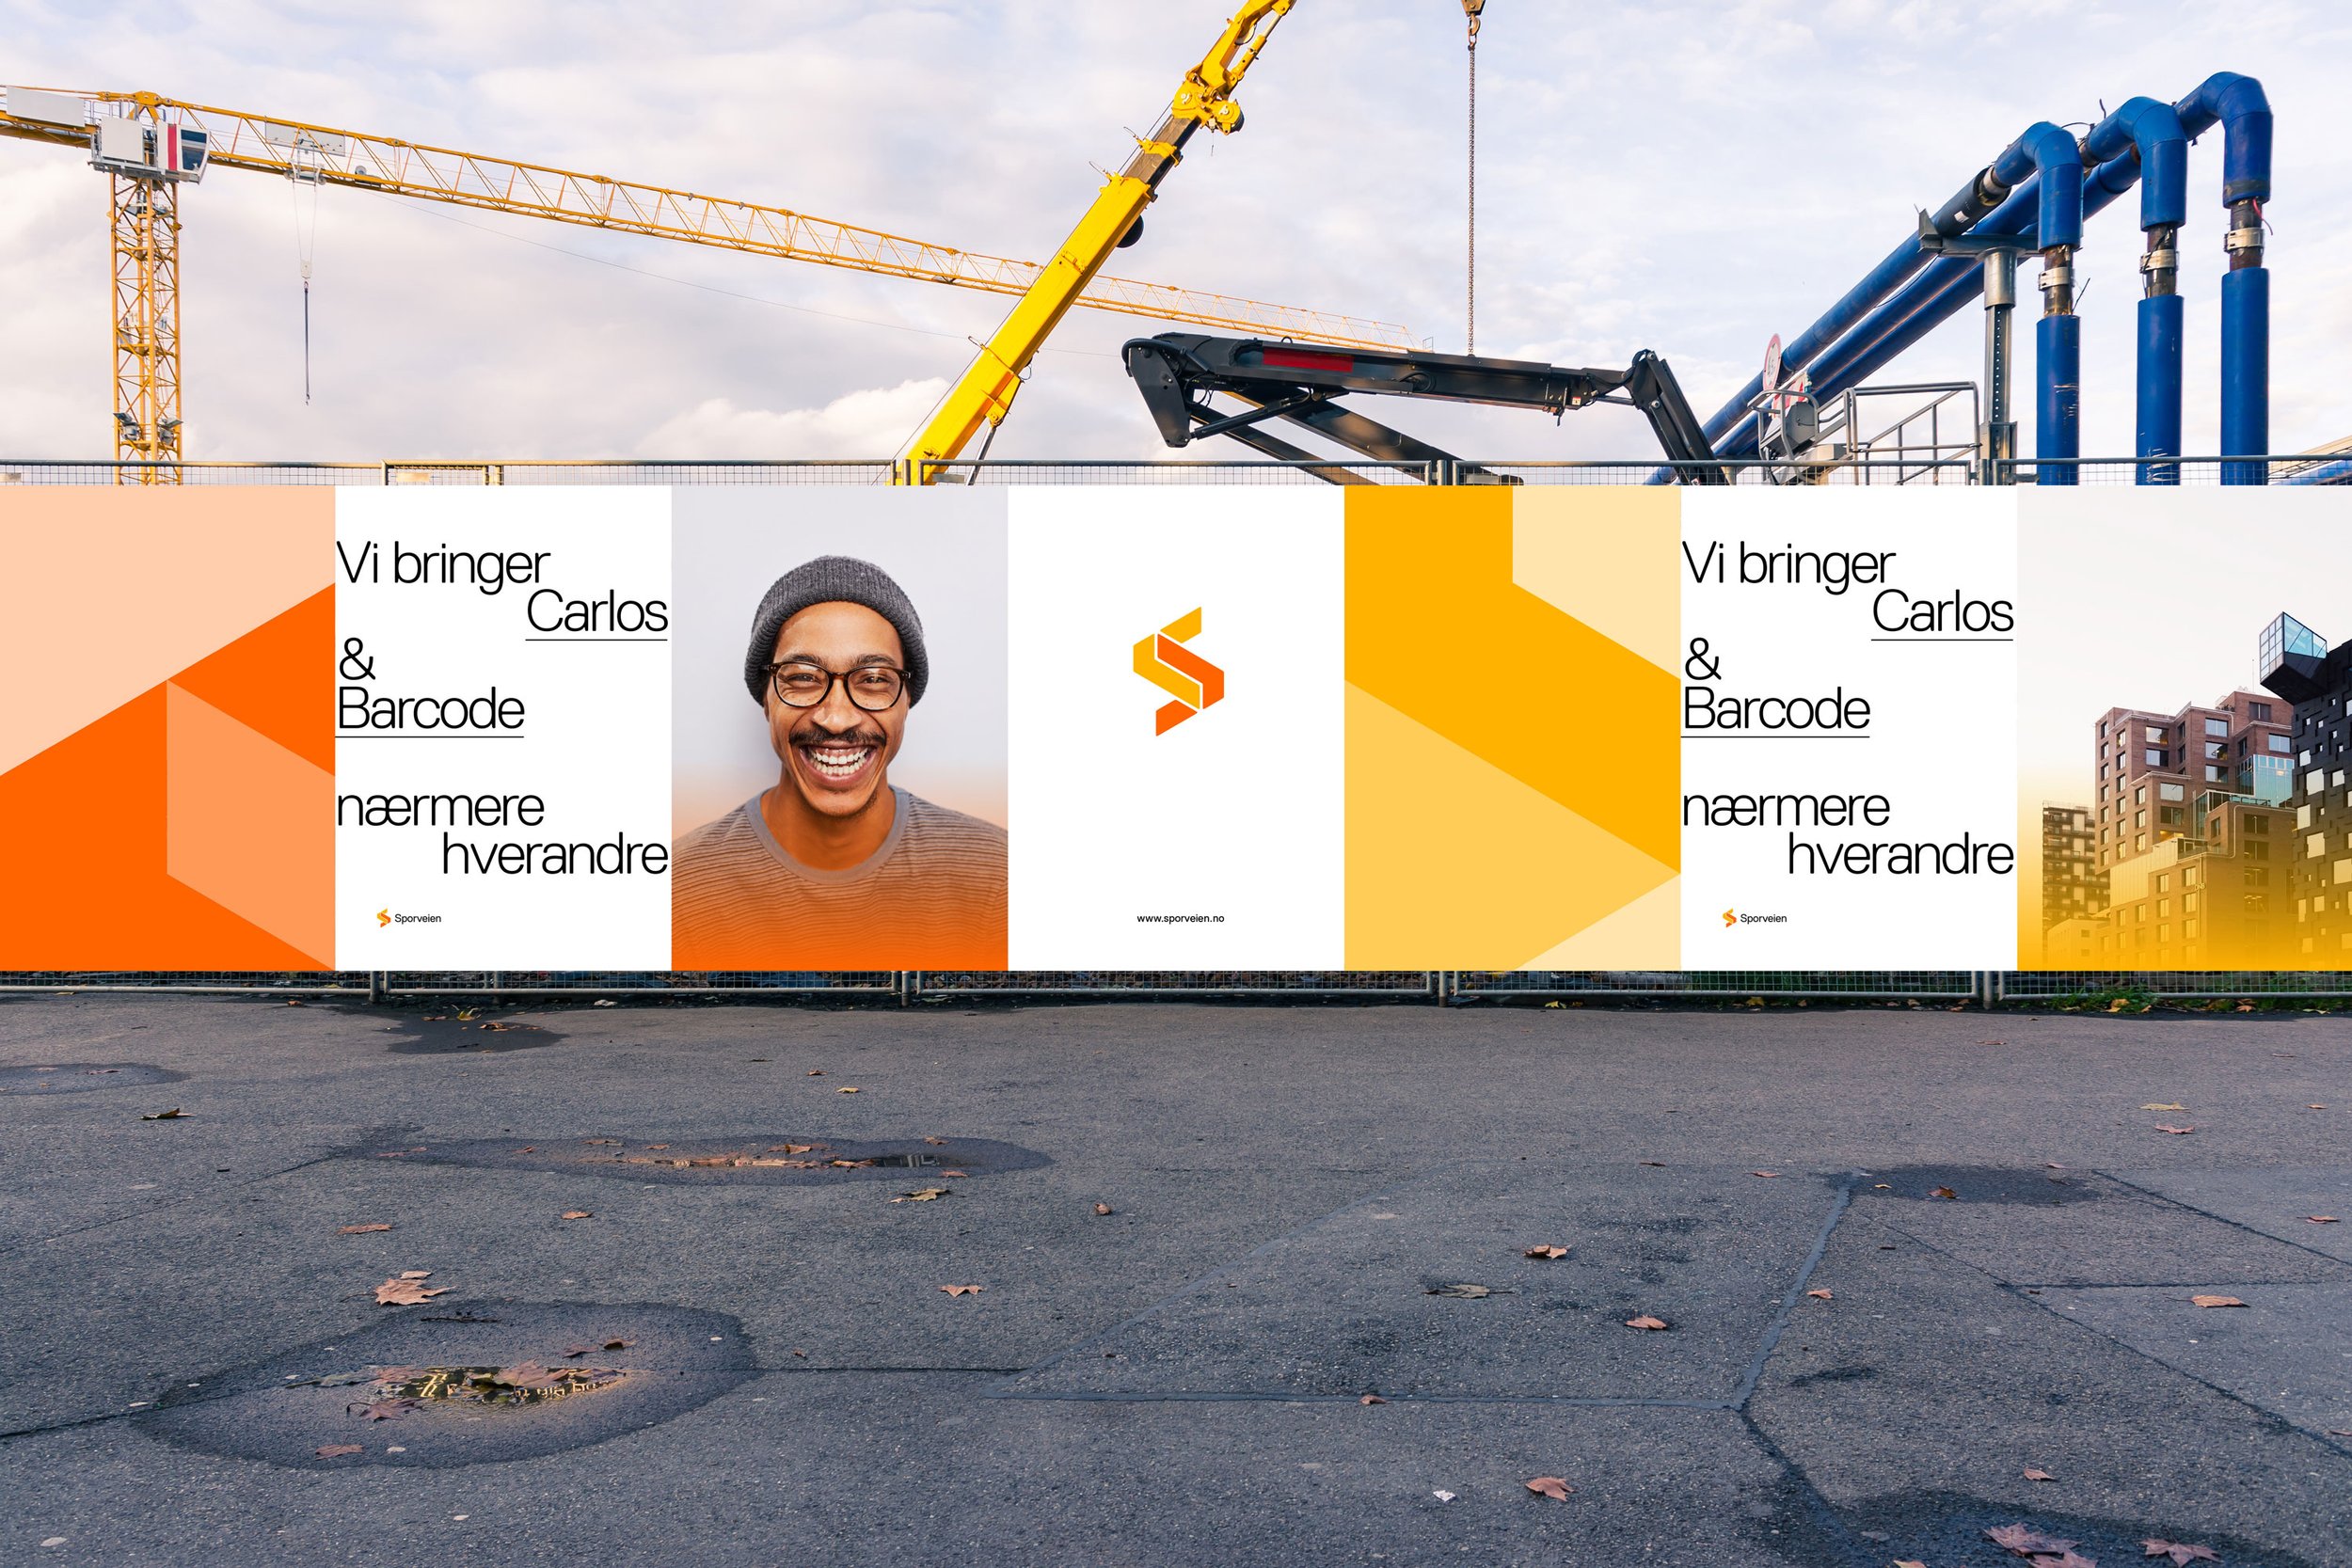 Advertising of Sporveien at the construction site